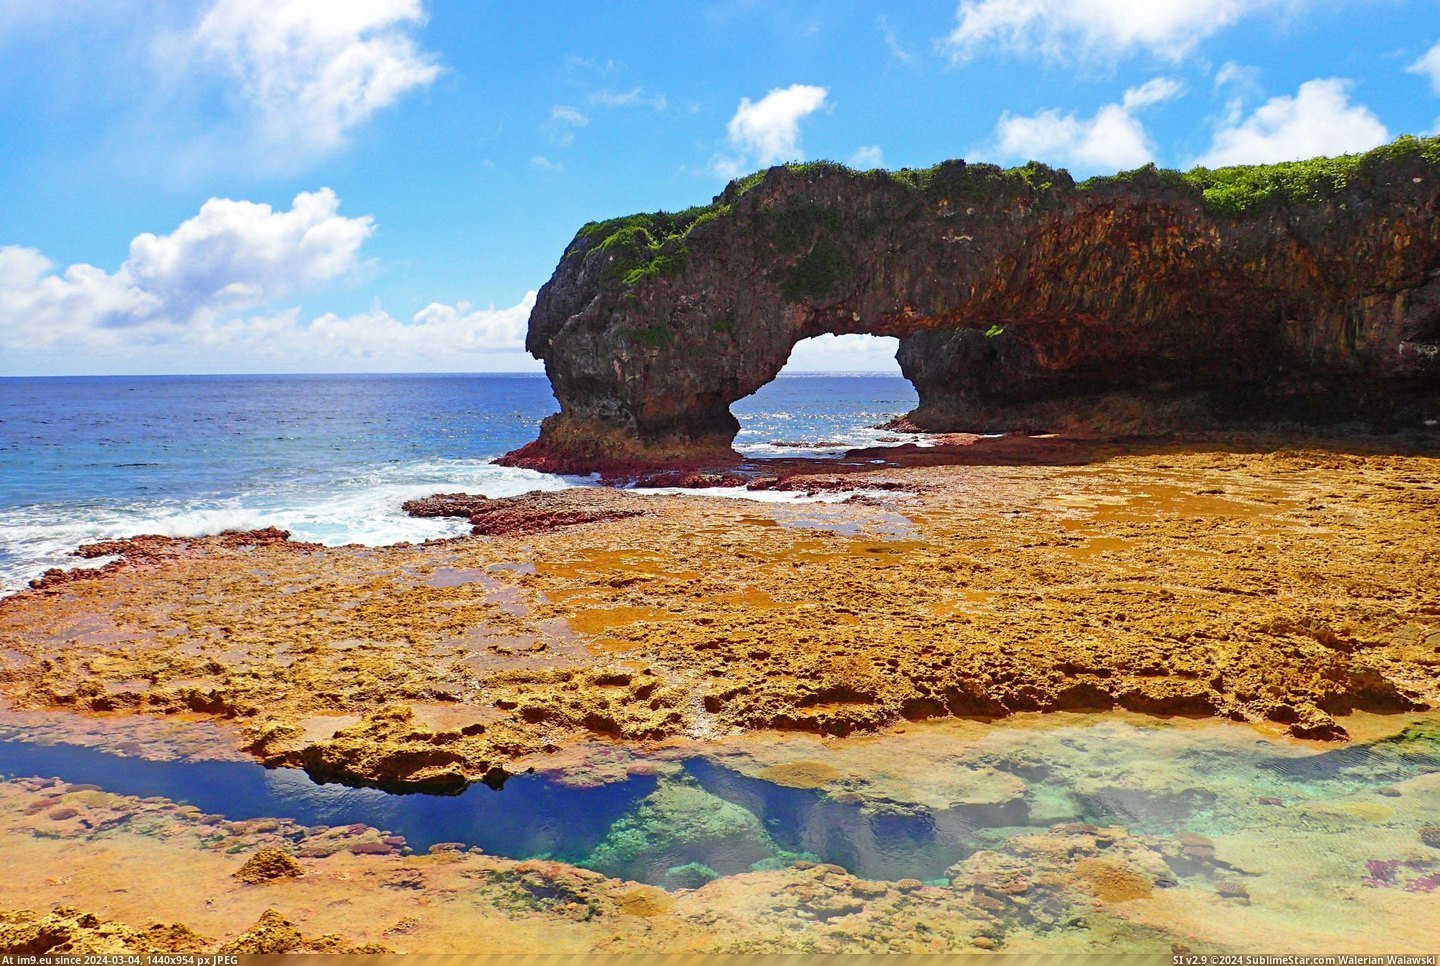 #Tiny #Island #Rock #Coastline #Formations #Country #Arches #Coral [Earthporn] Coral channels and rock formations make up the coastline of this tiny island country | Talava Arches, Niue  [4608x30 Pic. (Image of album My r/EARTHPORN favs))